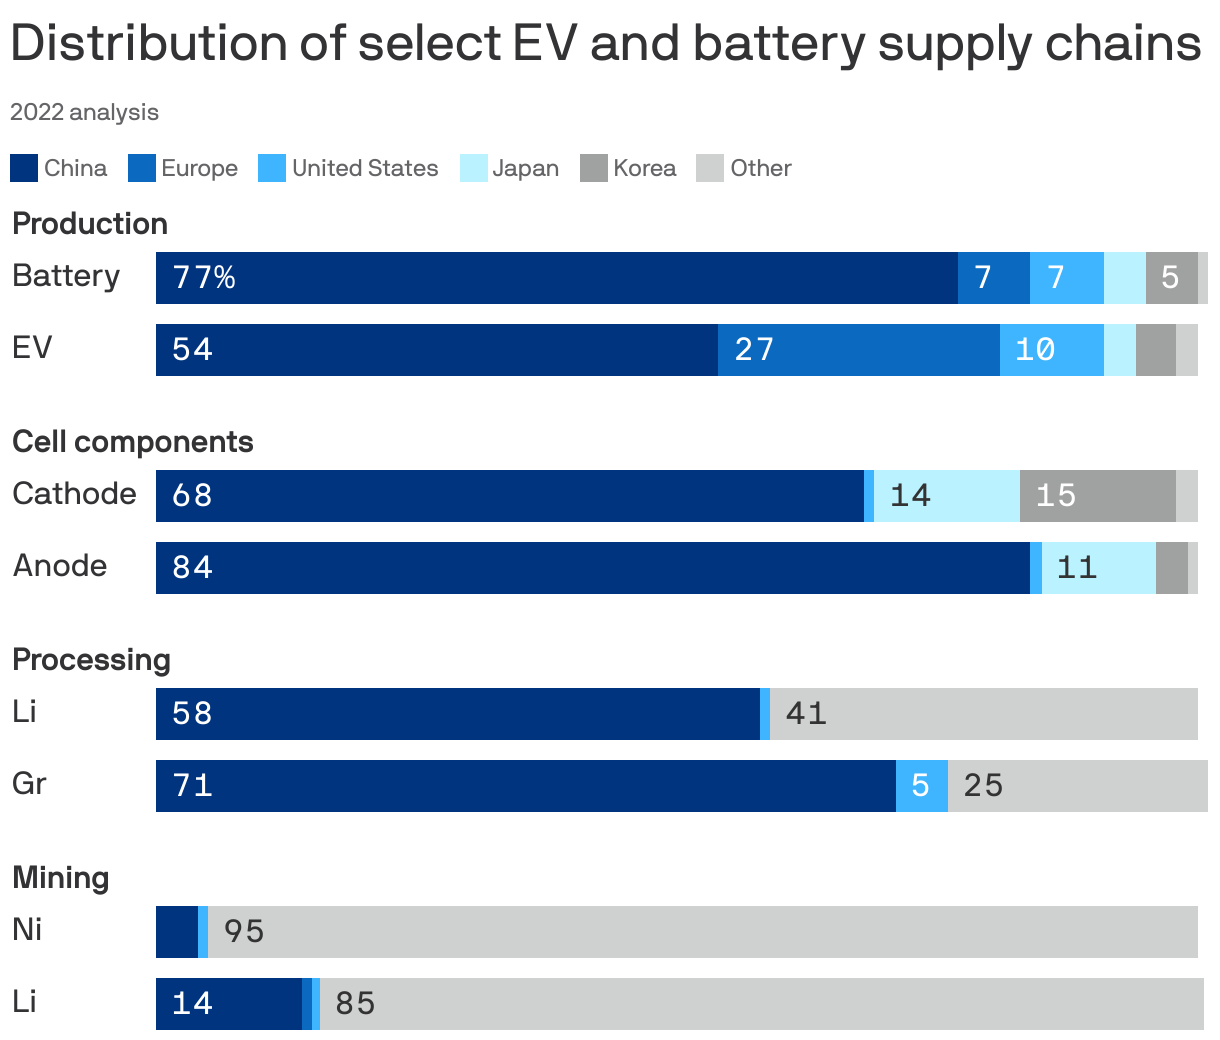 Distribution of select EV and battery supply chains